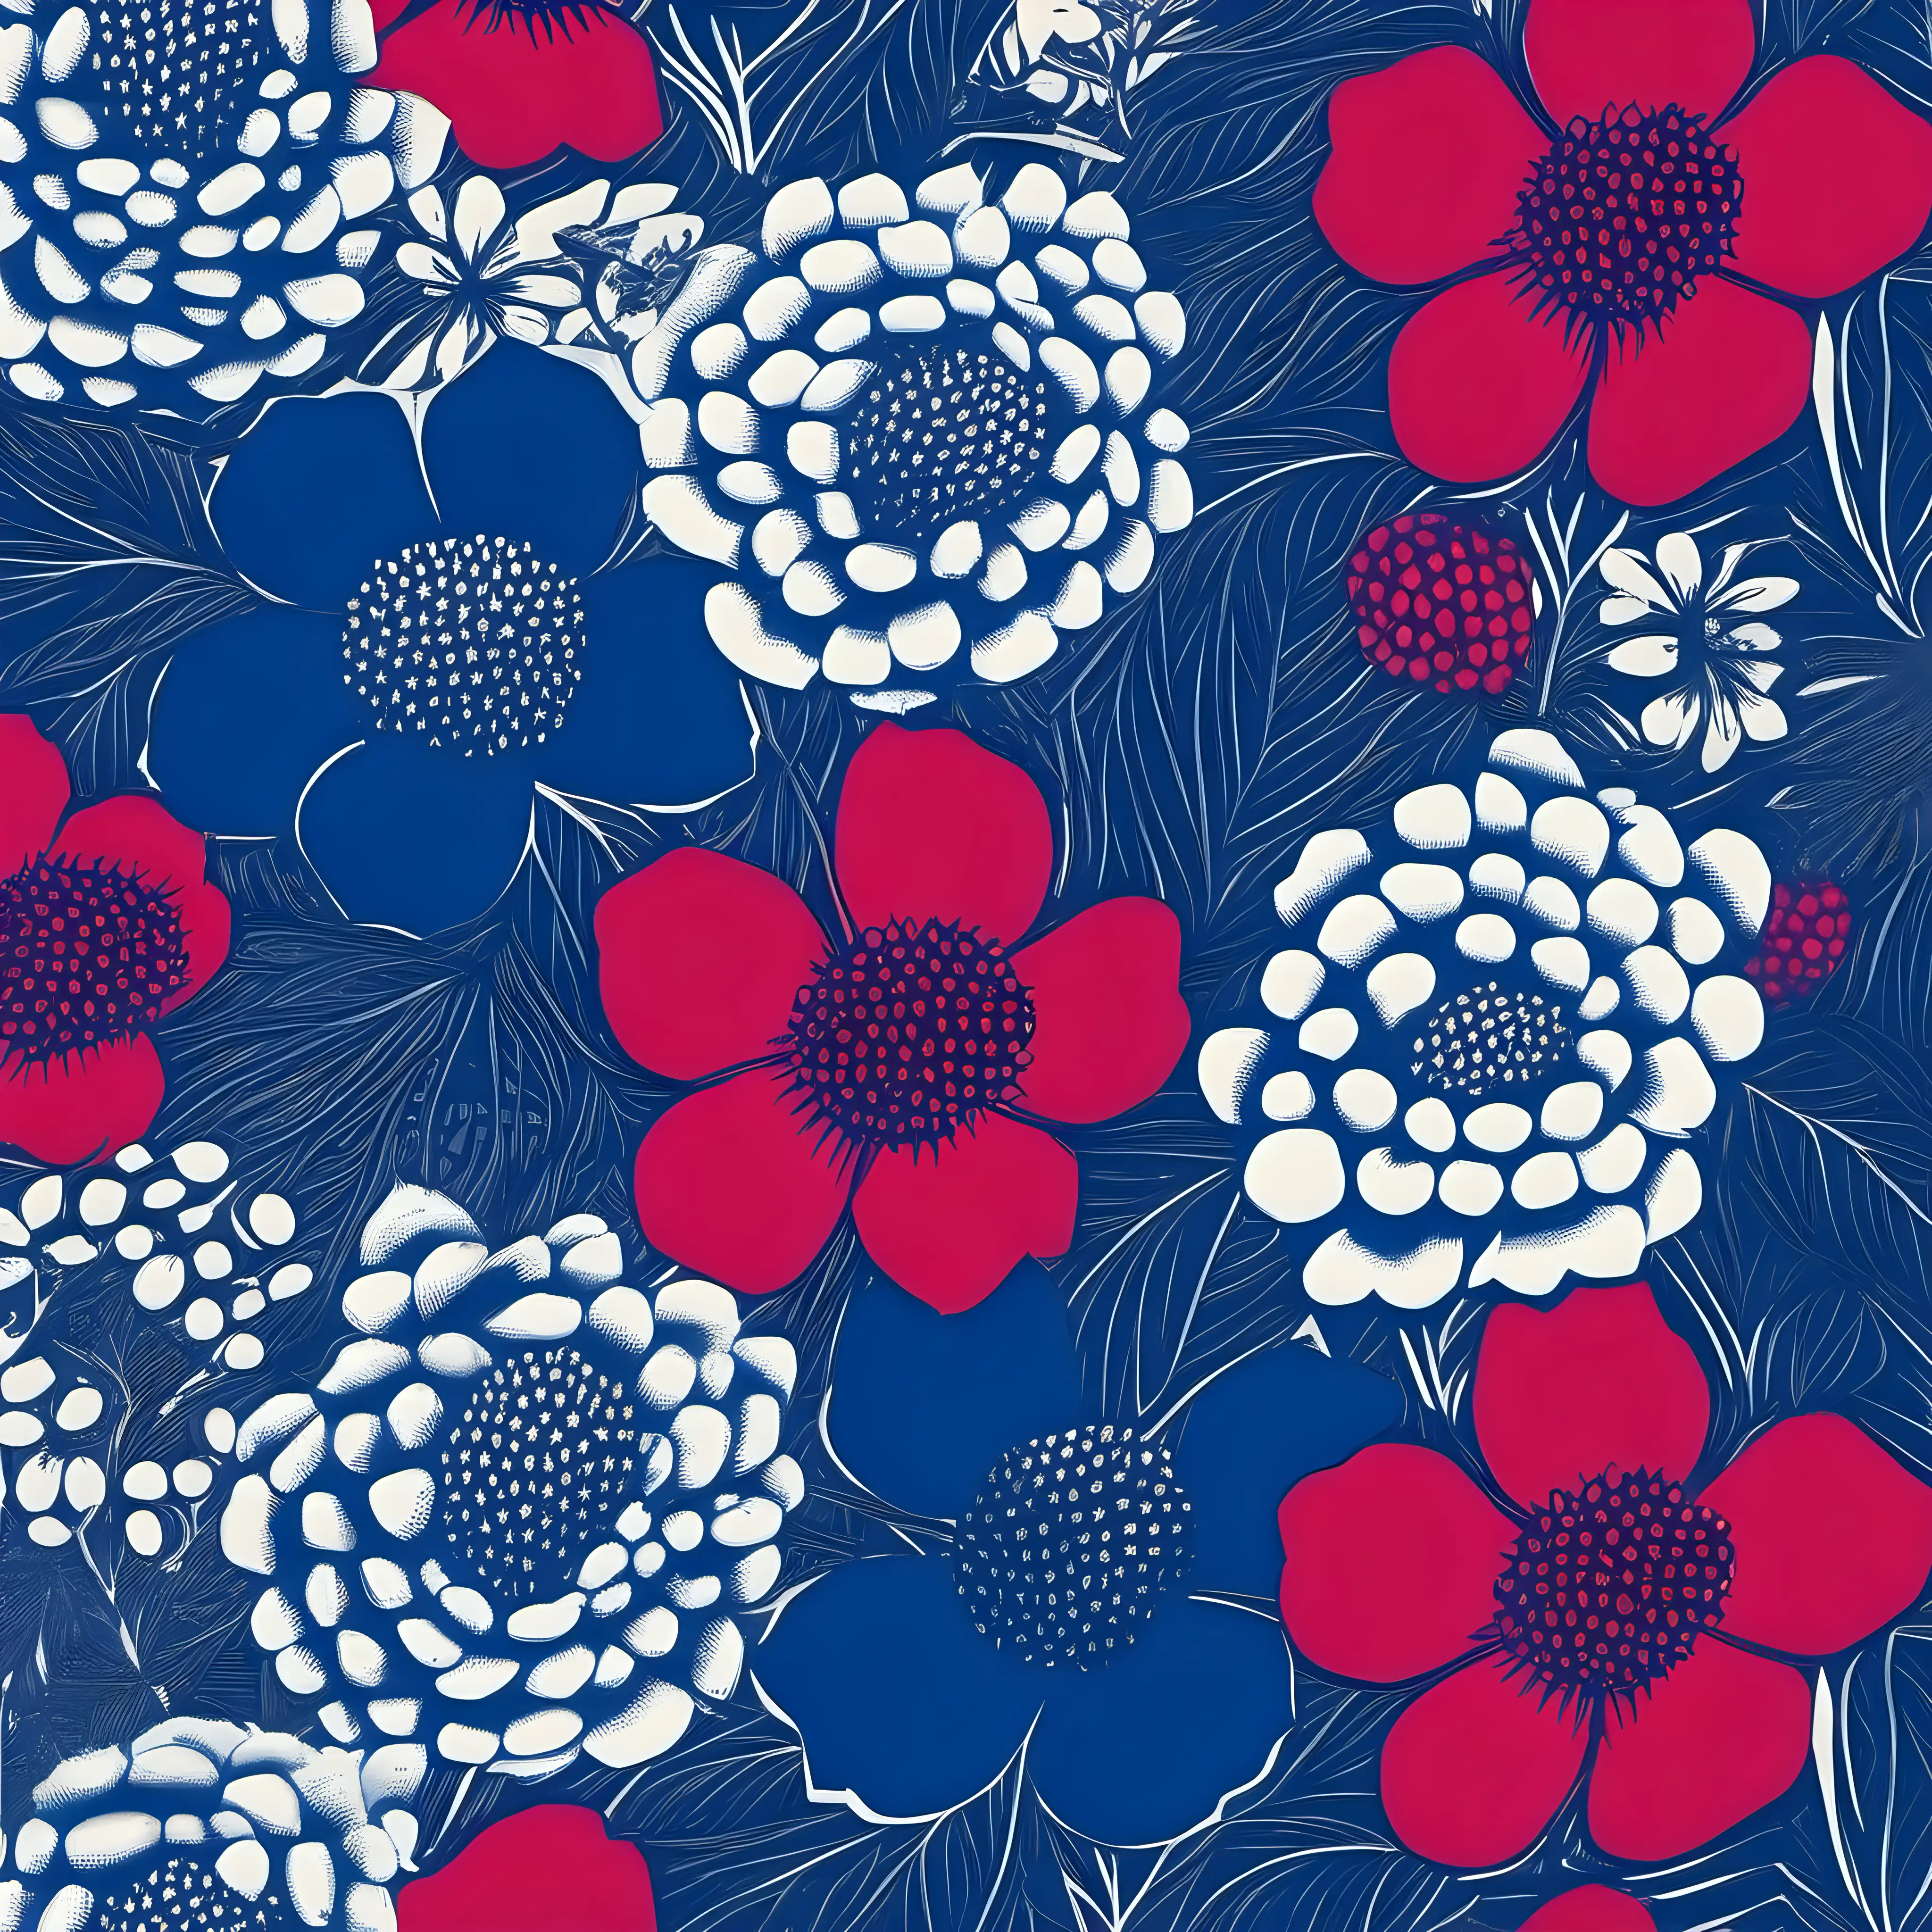 Botanic Elegance HandPrinted Raspberry and Blueberry Flowers in Andy Warhol Inspired Red and Blue